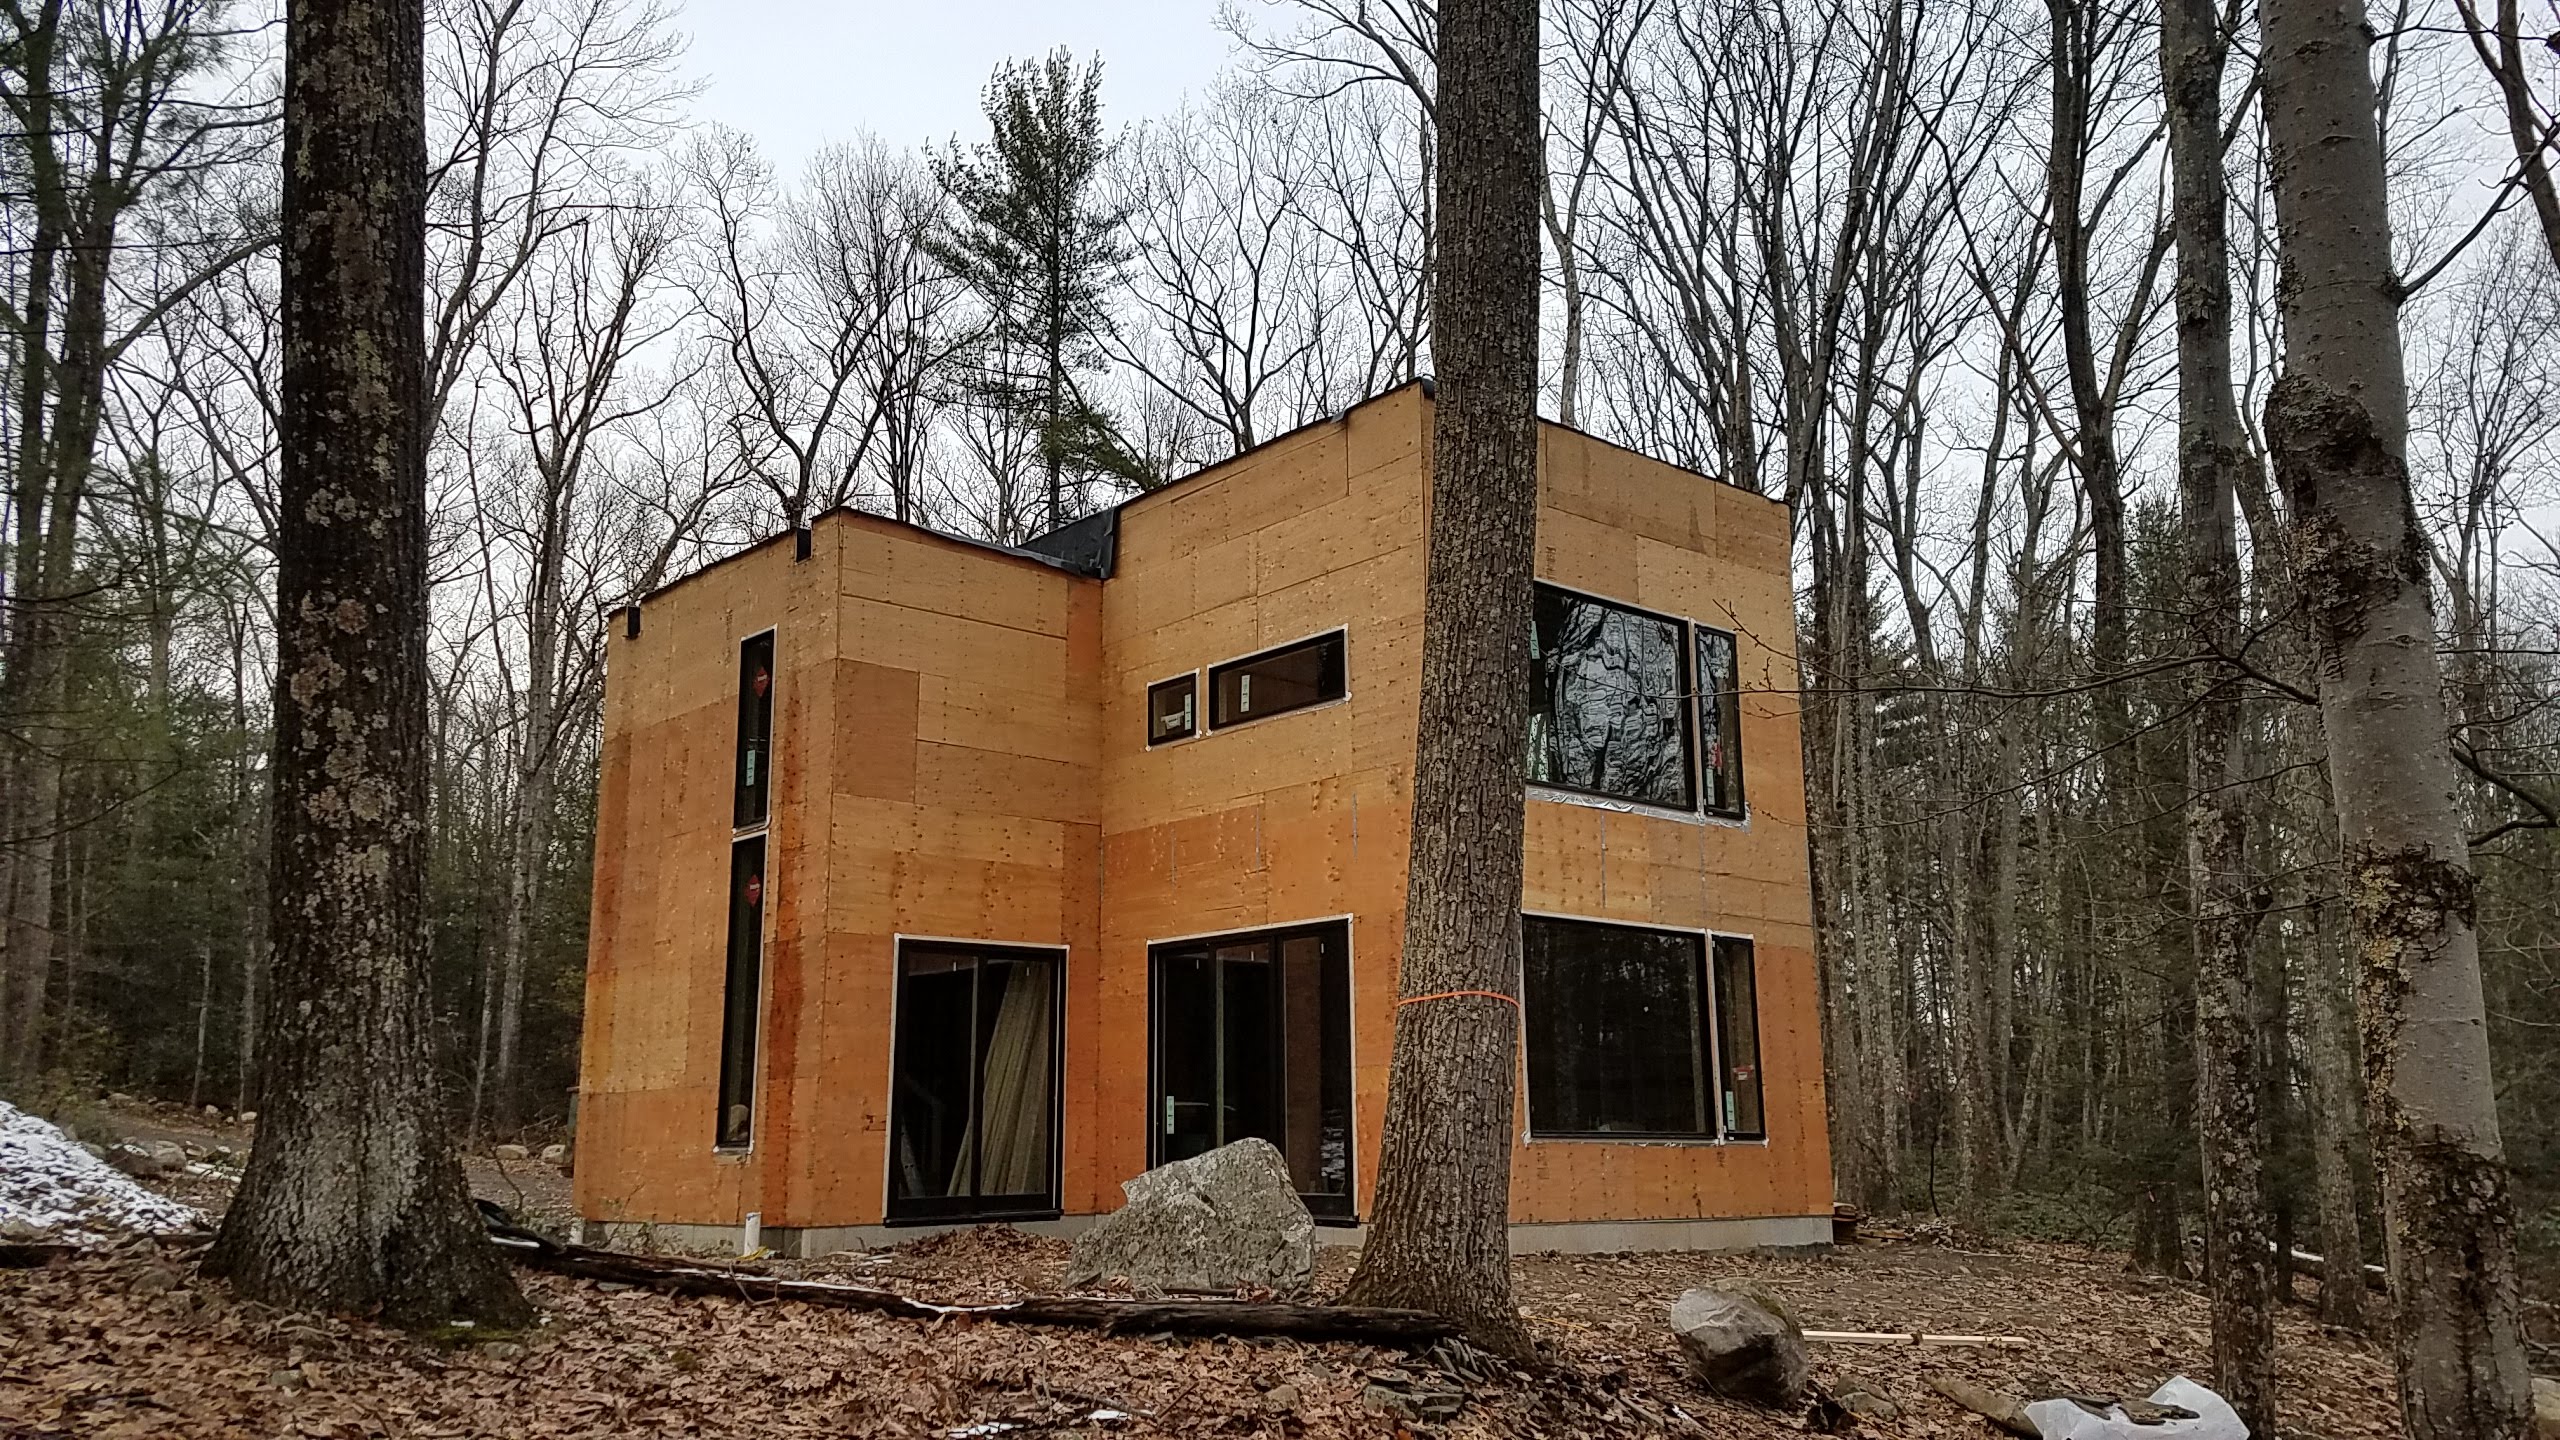 Hudson Valley Contemporary Homes: Construction Update